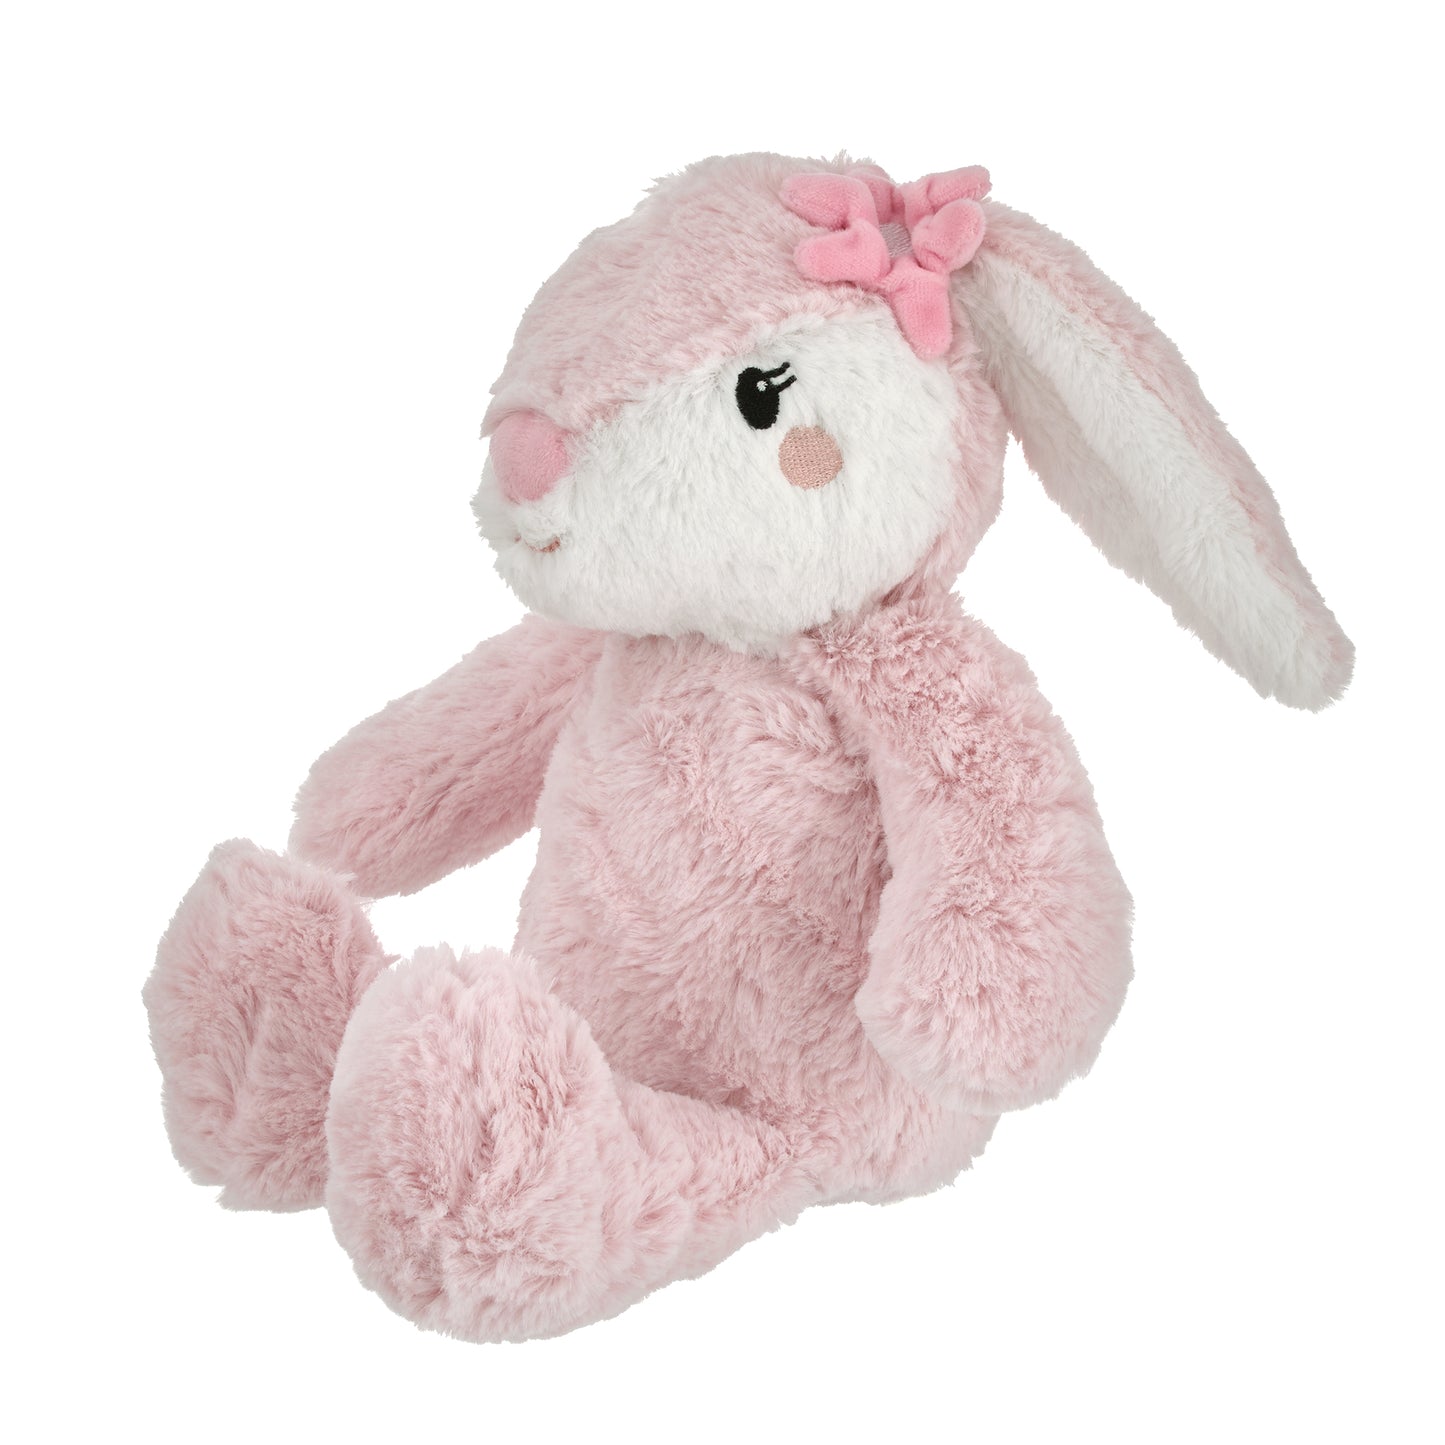 NoJo Keep Blooming Pink and White Super Soft Plush Stuffed Animal Bunny with Flower - "Opal"